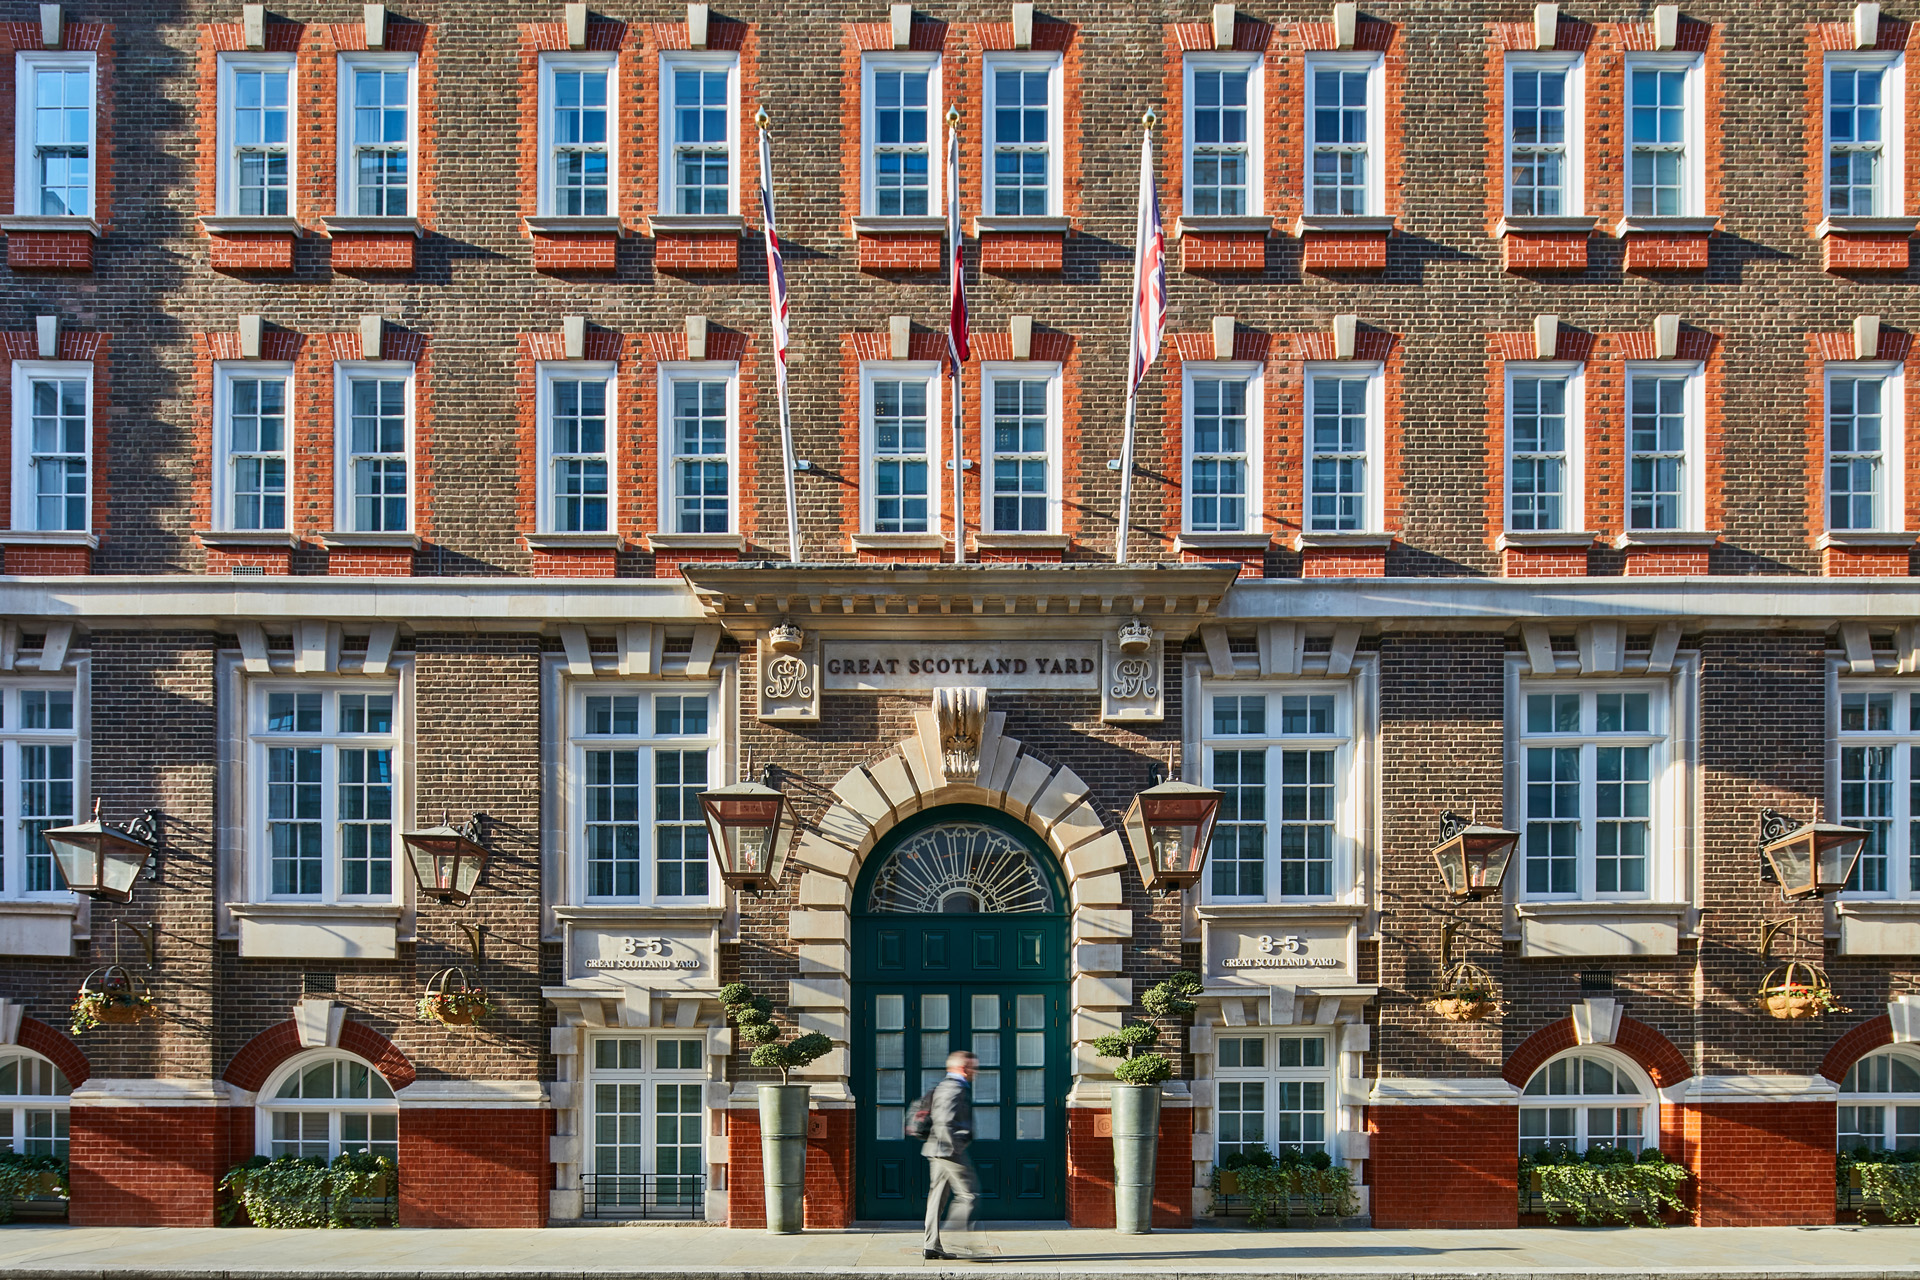 Great Scotland Yard is one of the UK's most accessible hotels